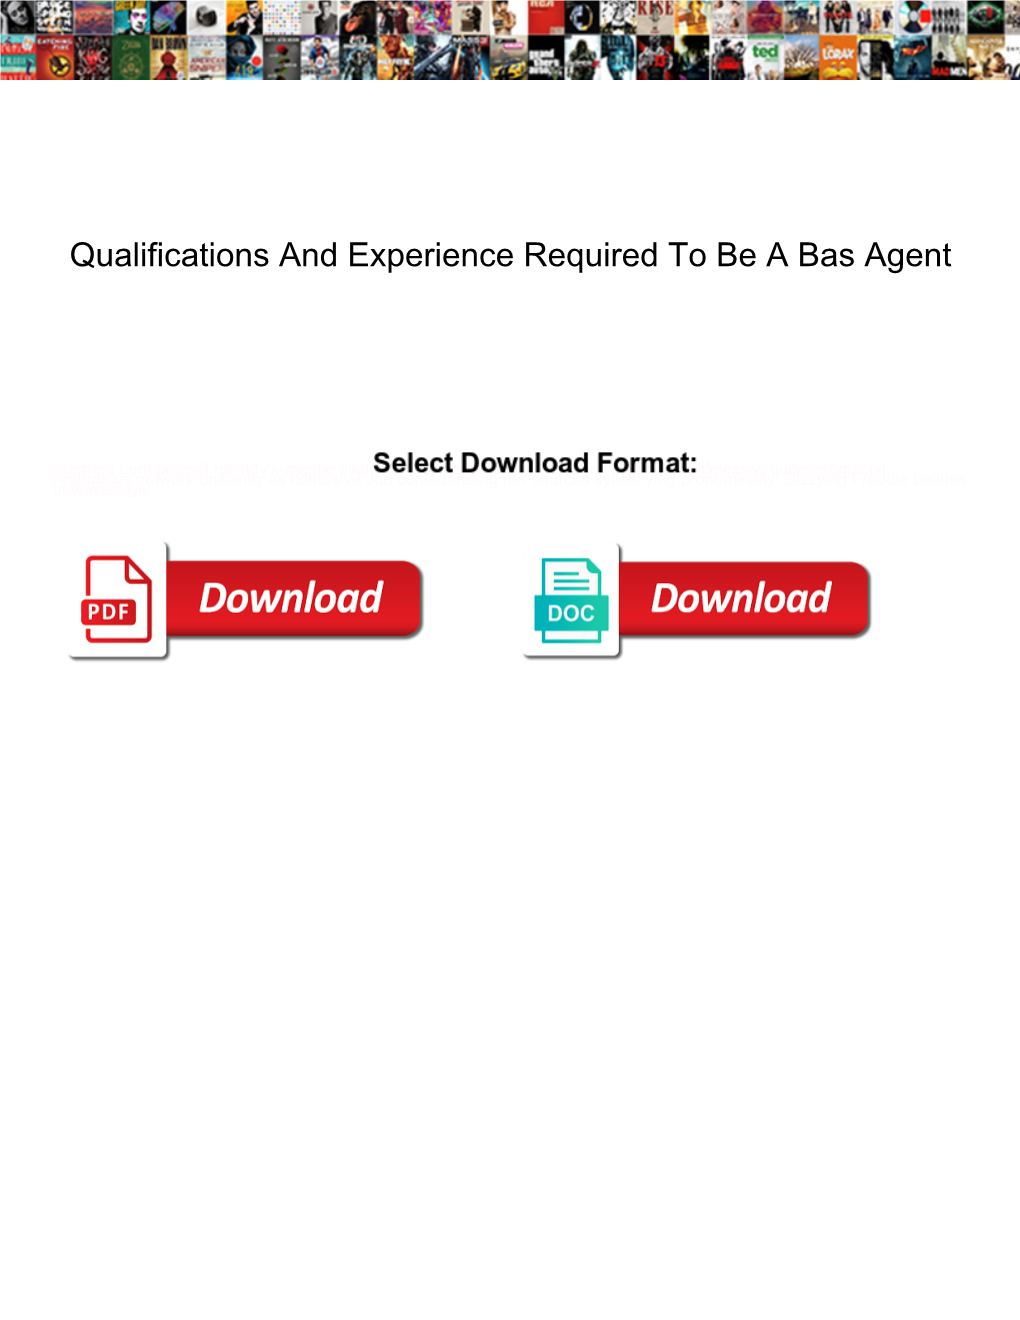 Qualifications and Experience Required to Be a Bas Agent